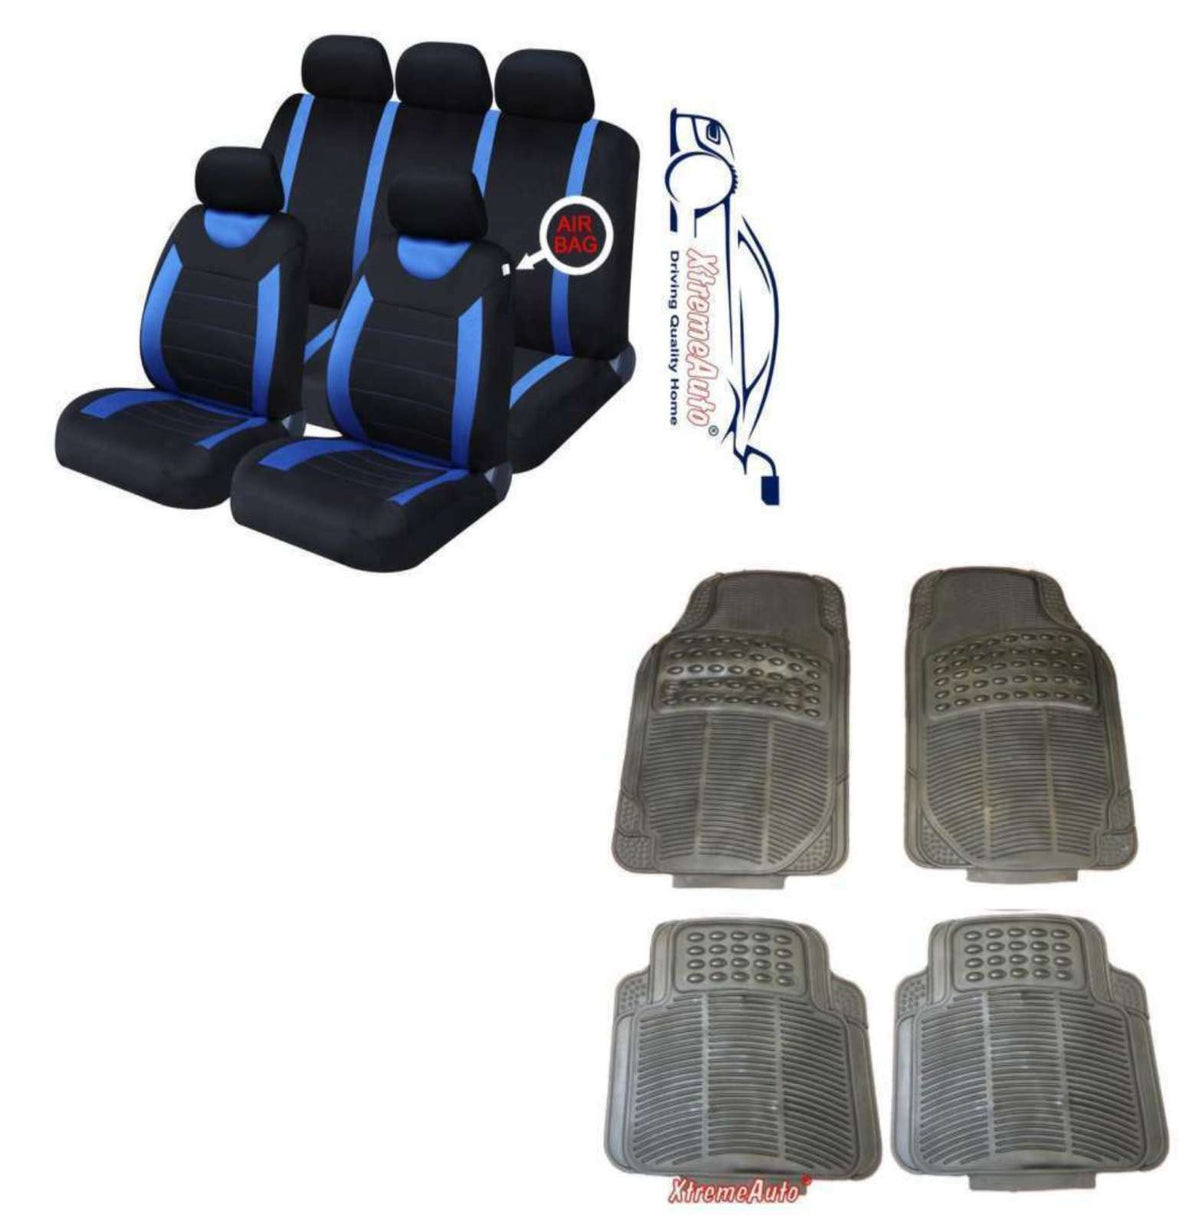 CARNABY BLUE CAR SEAT COVERS + RUBBER FLOOR MATS